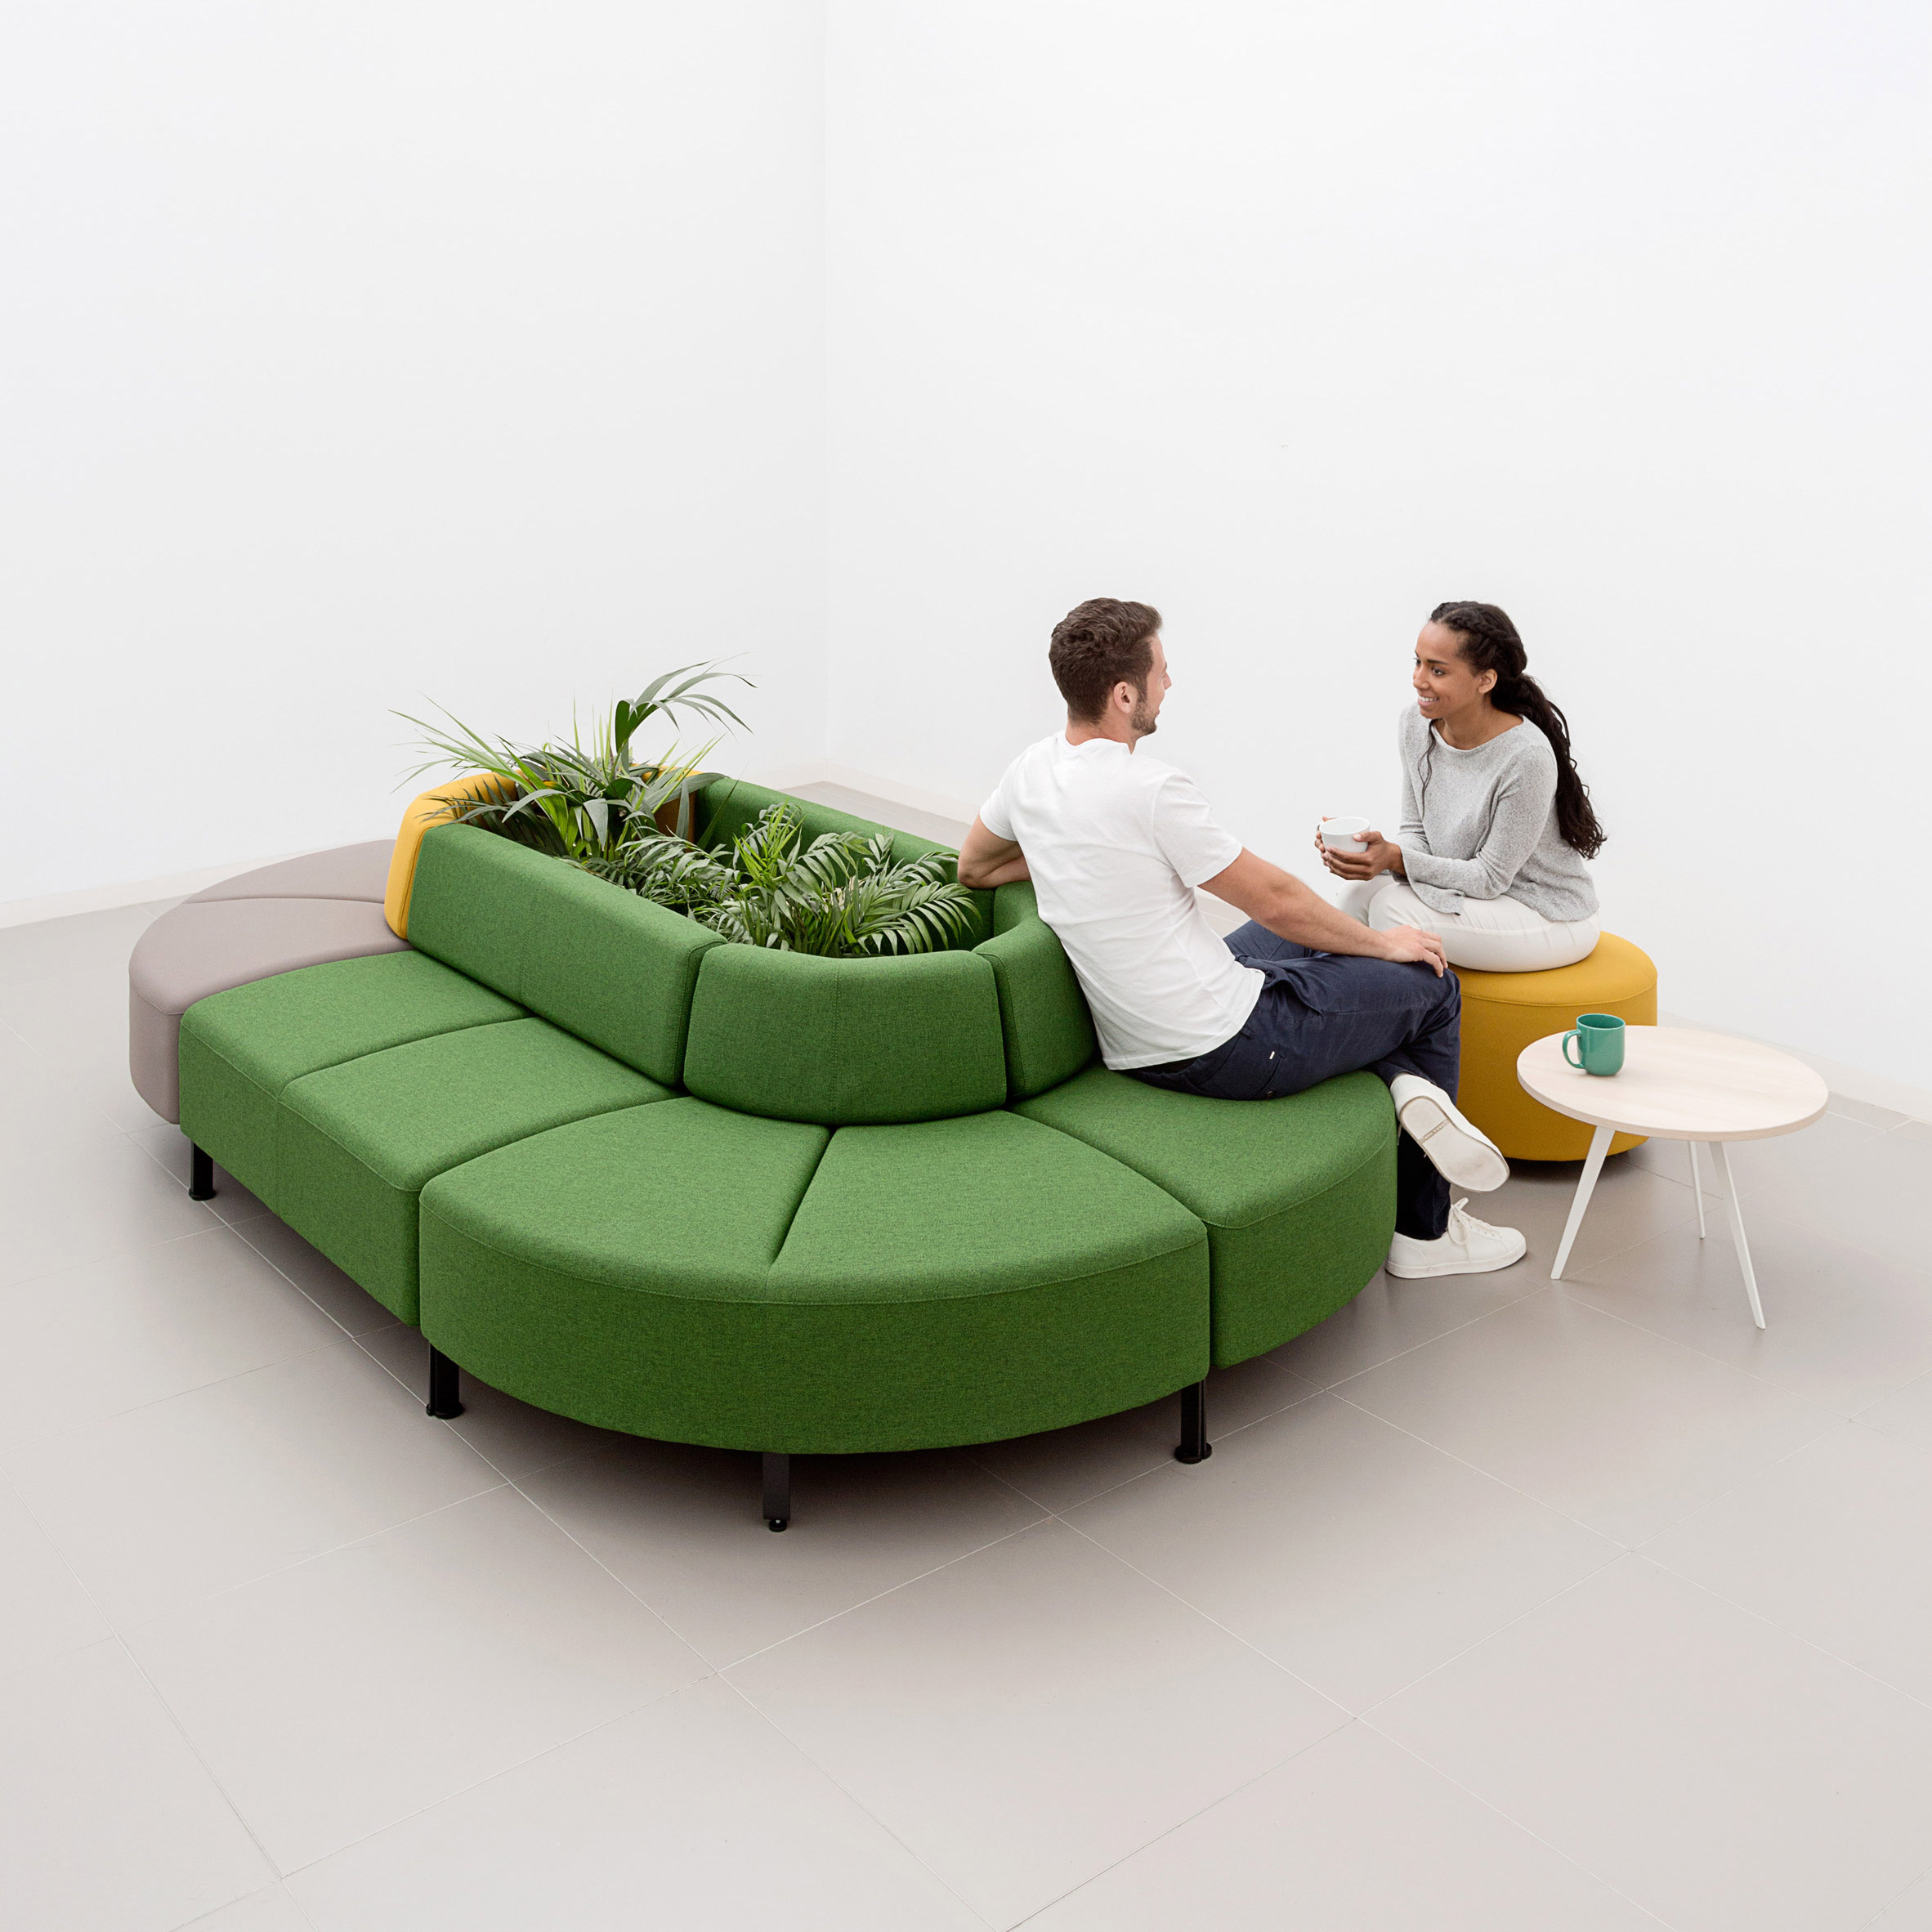 An oval-shaped sofa with a central planter by Actiu